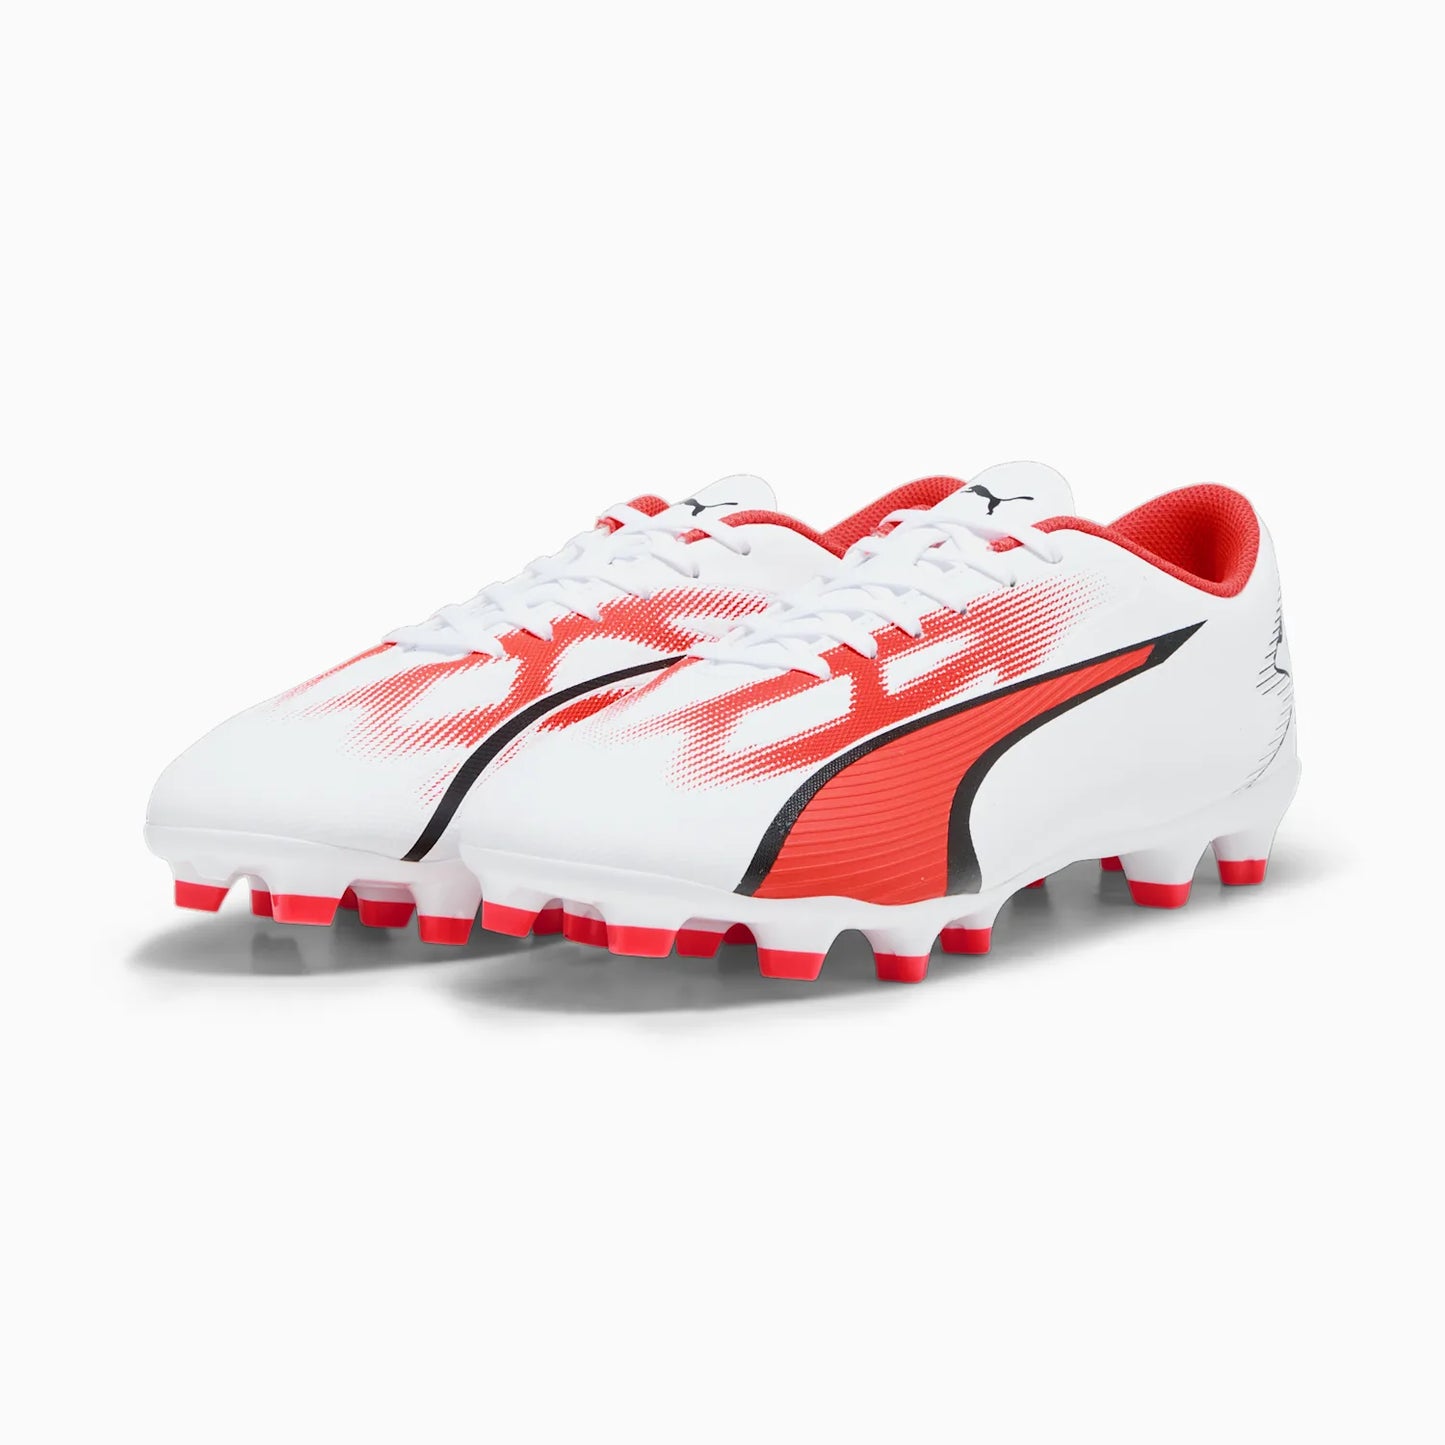 - Puma ULTRA PLAY FG/AG Men's Football Boots White Fire Orchid - (107423 01) - UP6 - R2L17